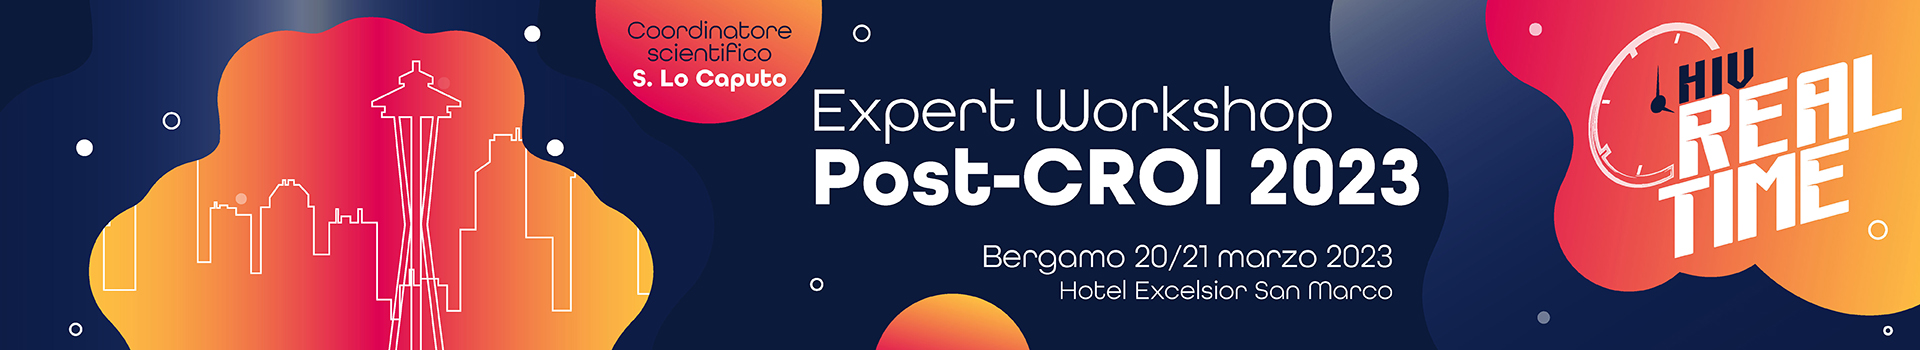 Expert Workshop - Real Time - Post CROI